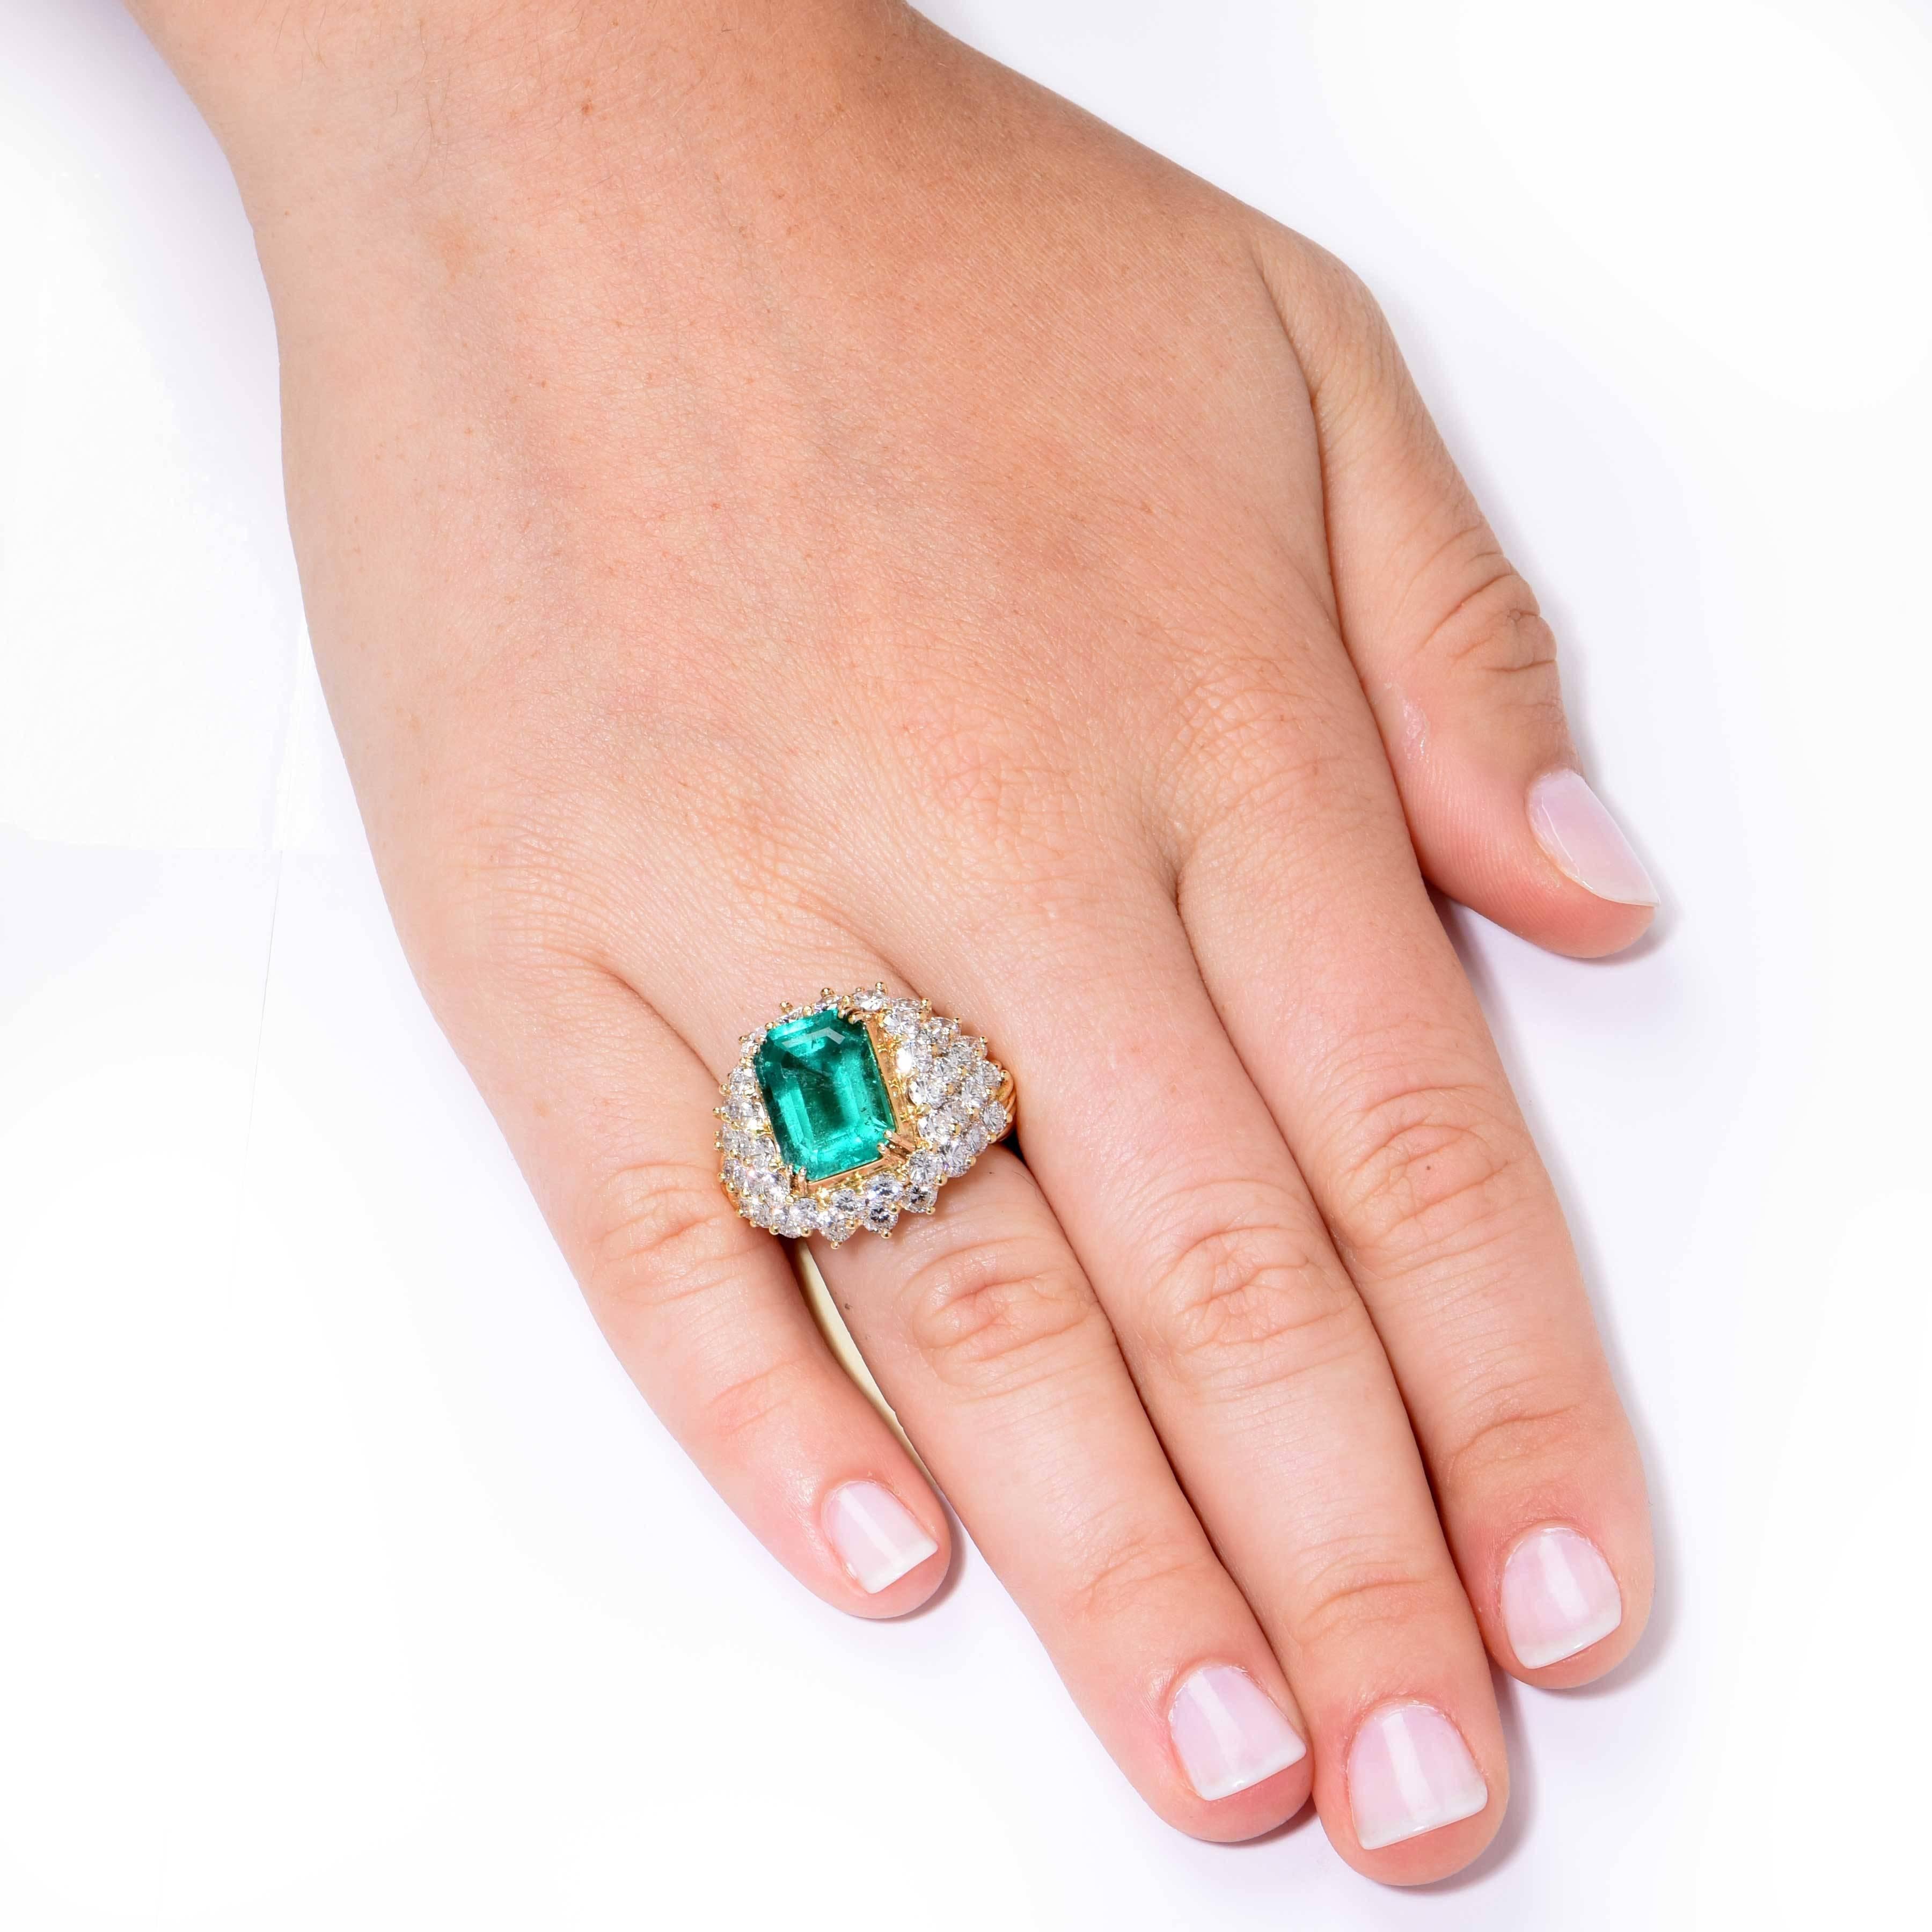 This beautiful natural Colombian Emerald and Diamond Ring features an emerald cut emerald weighing 6.20 carats, and round brilliant cut diamonds weighing 5.20 carats. The diamonds are approximately G/H in color and VS in clarity. 

Metal 18 KT